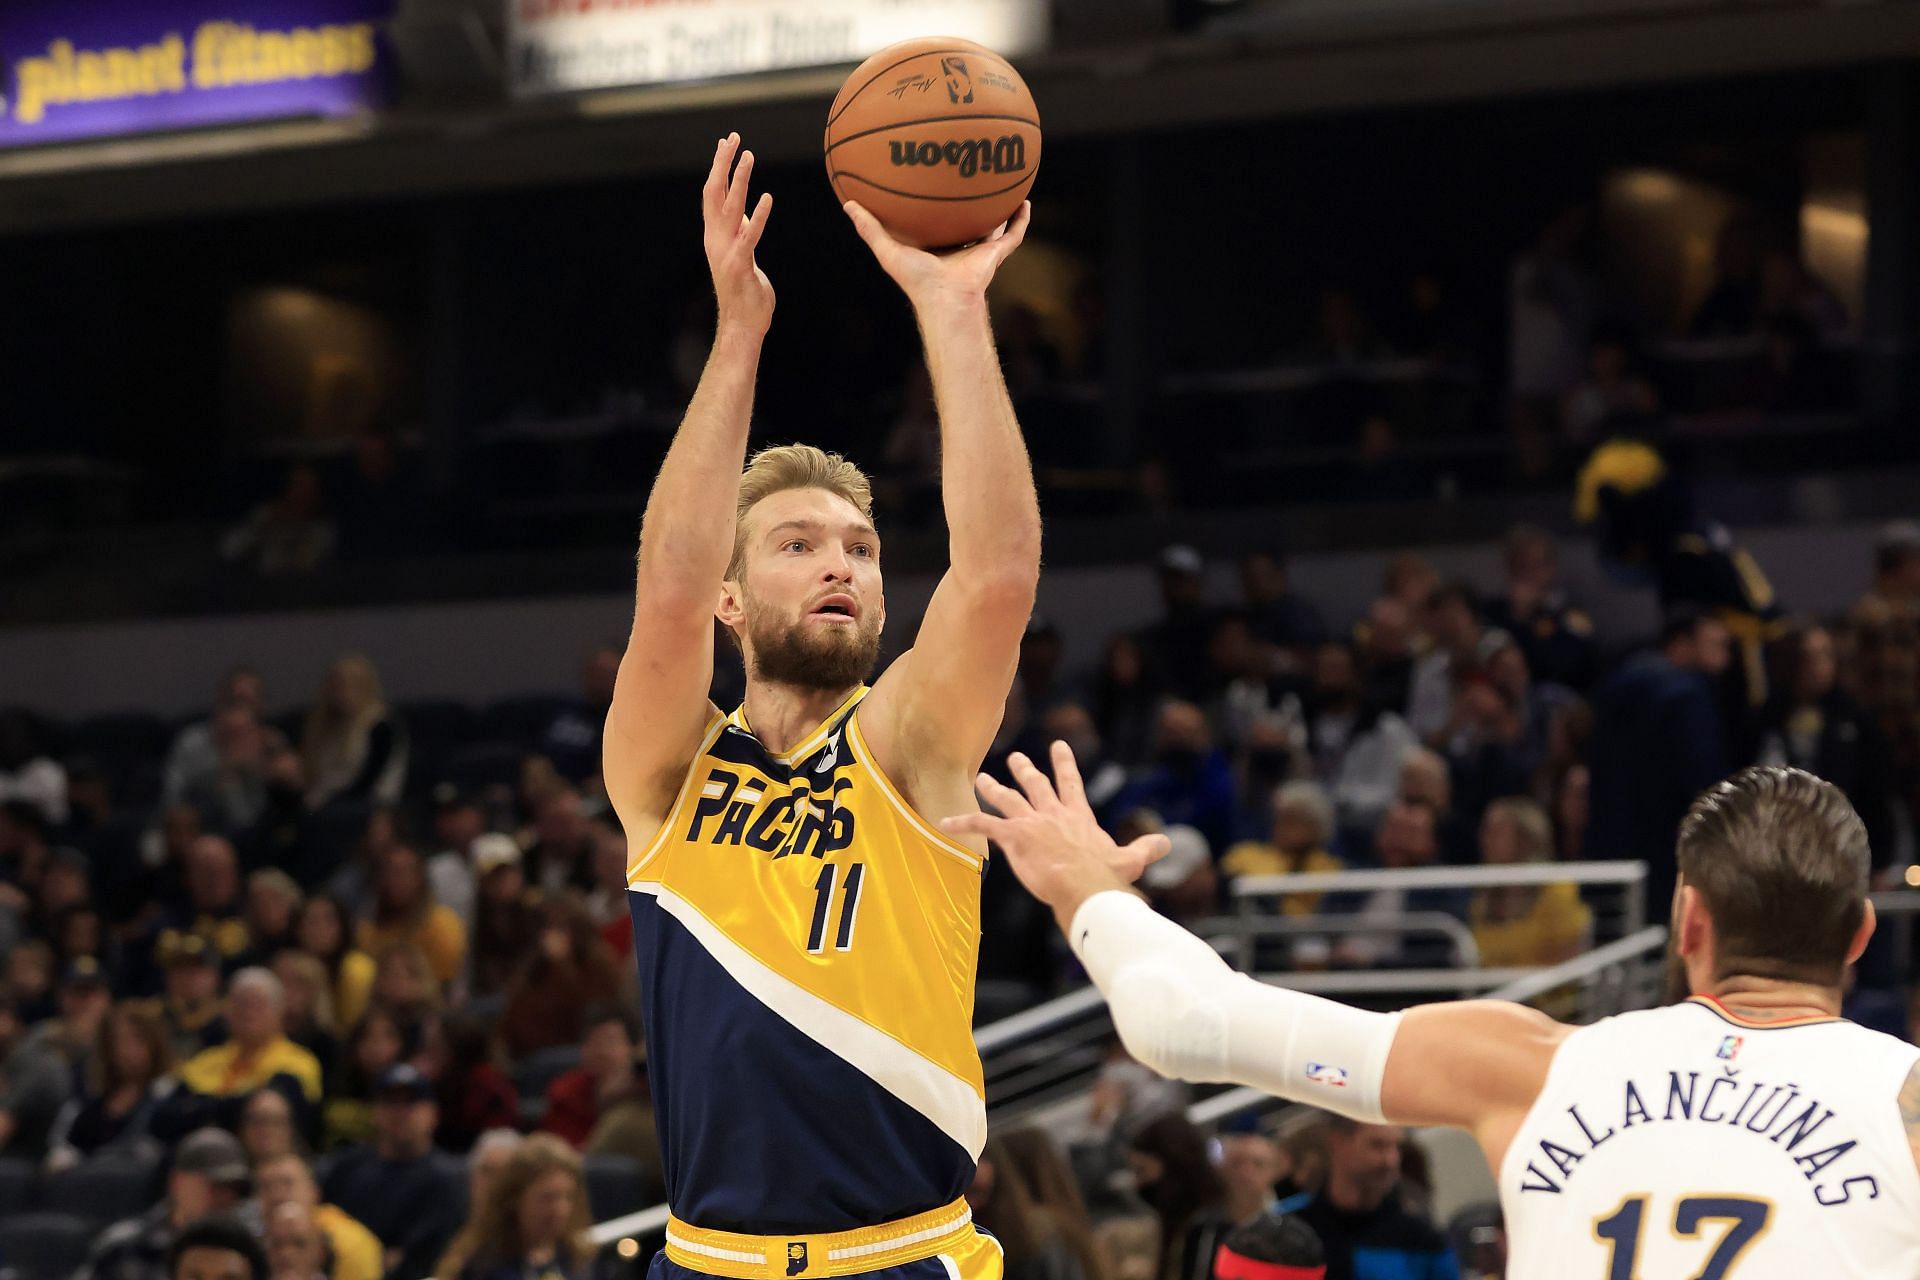 Domantas Sabonis (#11) of the Indiana Pacers takes a shot.